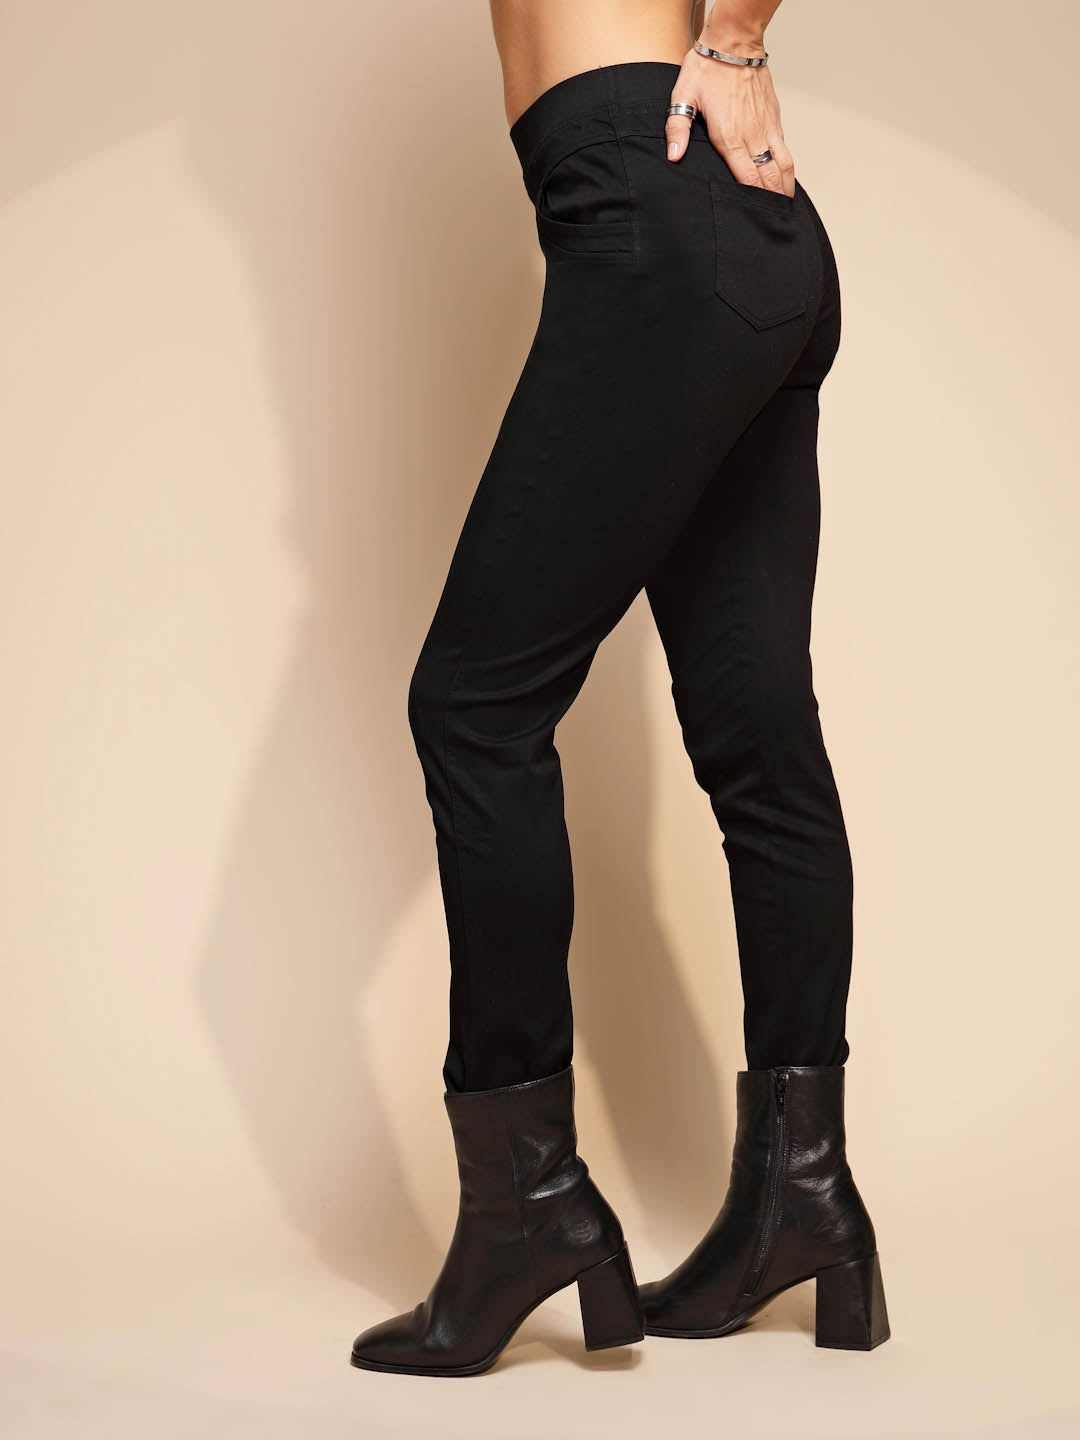 Women Black Mid-Rise Stretchable Ankle Length Jegging